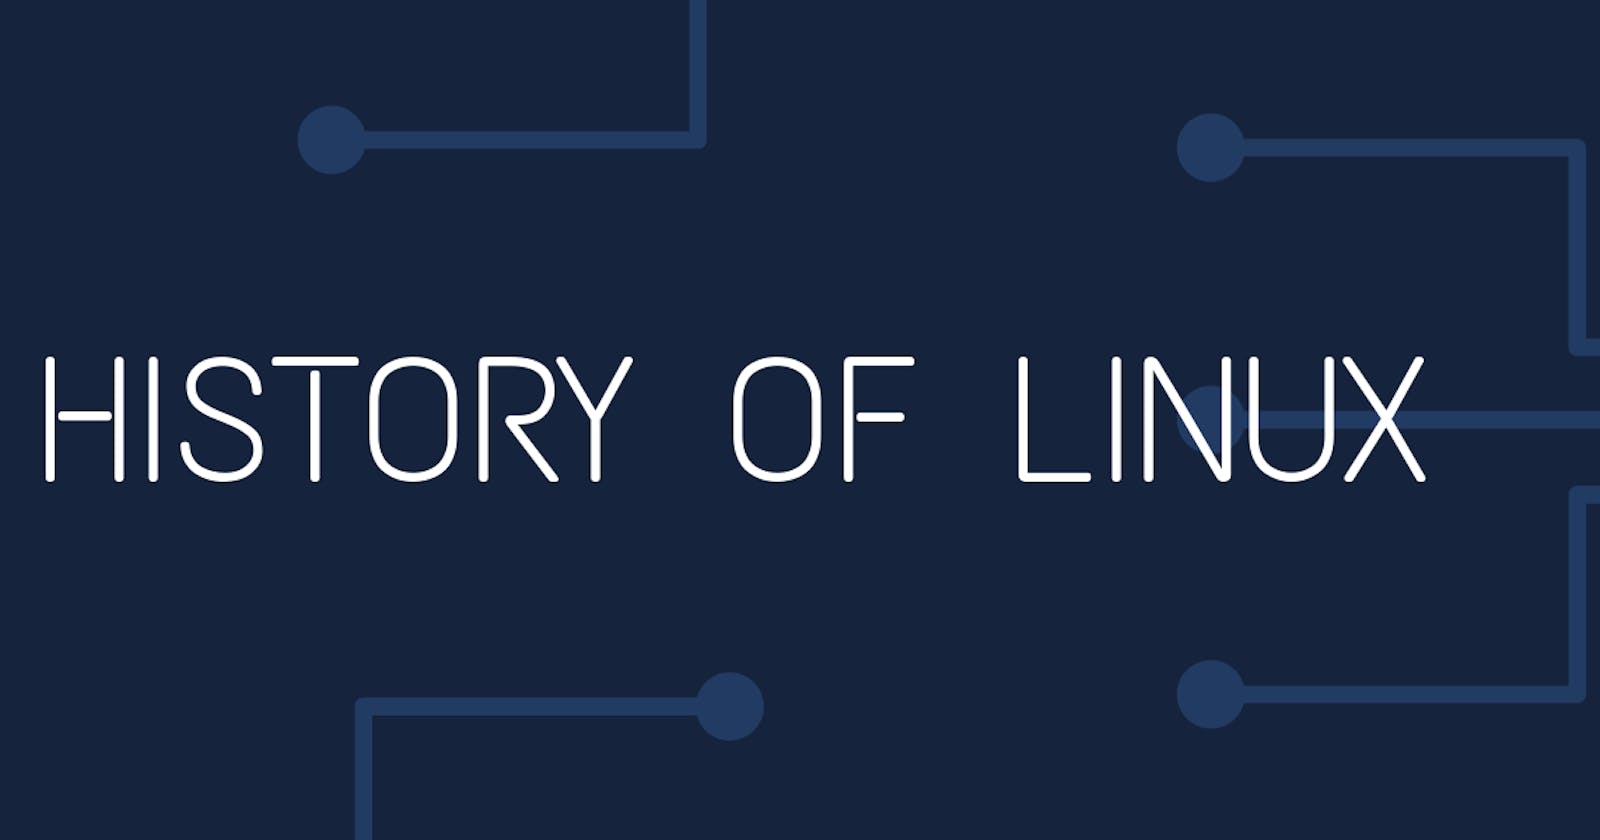 Course - 1 (The history of Linux)